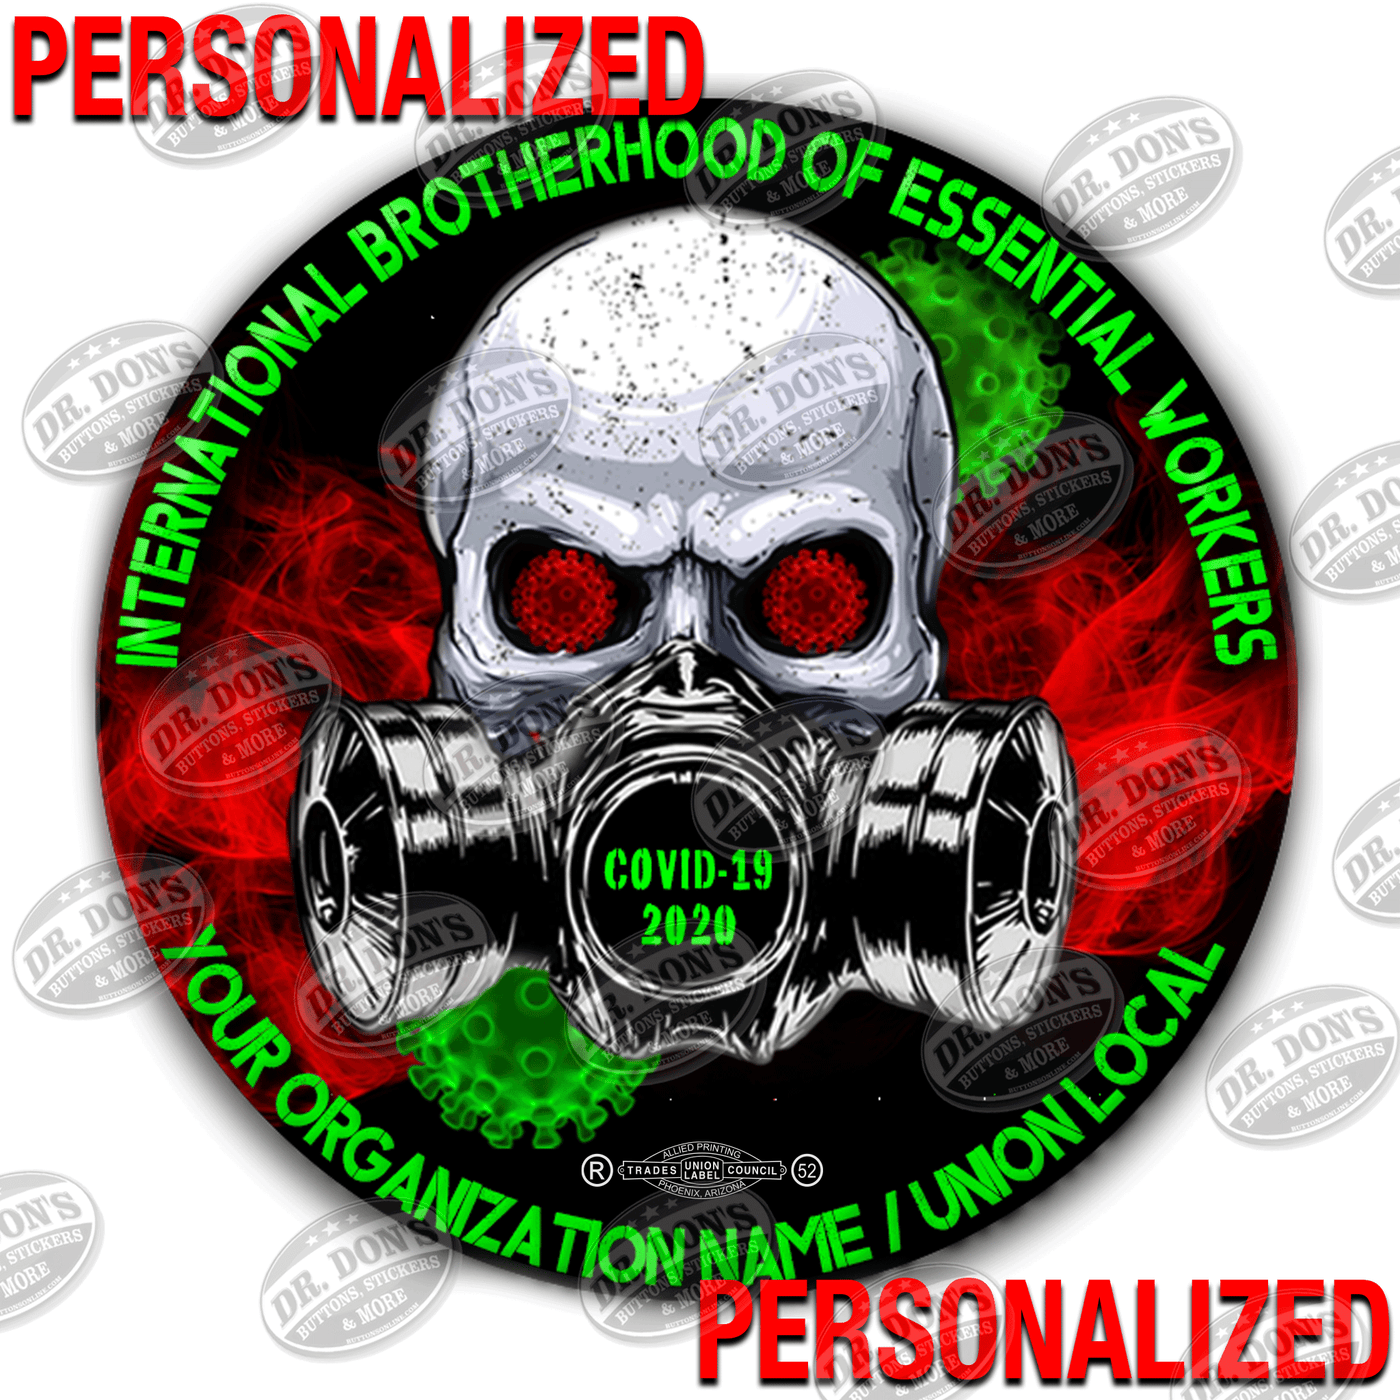 Personalize this Sticker. International Brotherhood of Essential Worker Hard Hat Decal Stickers